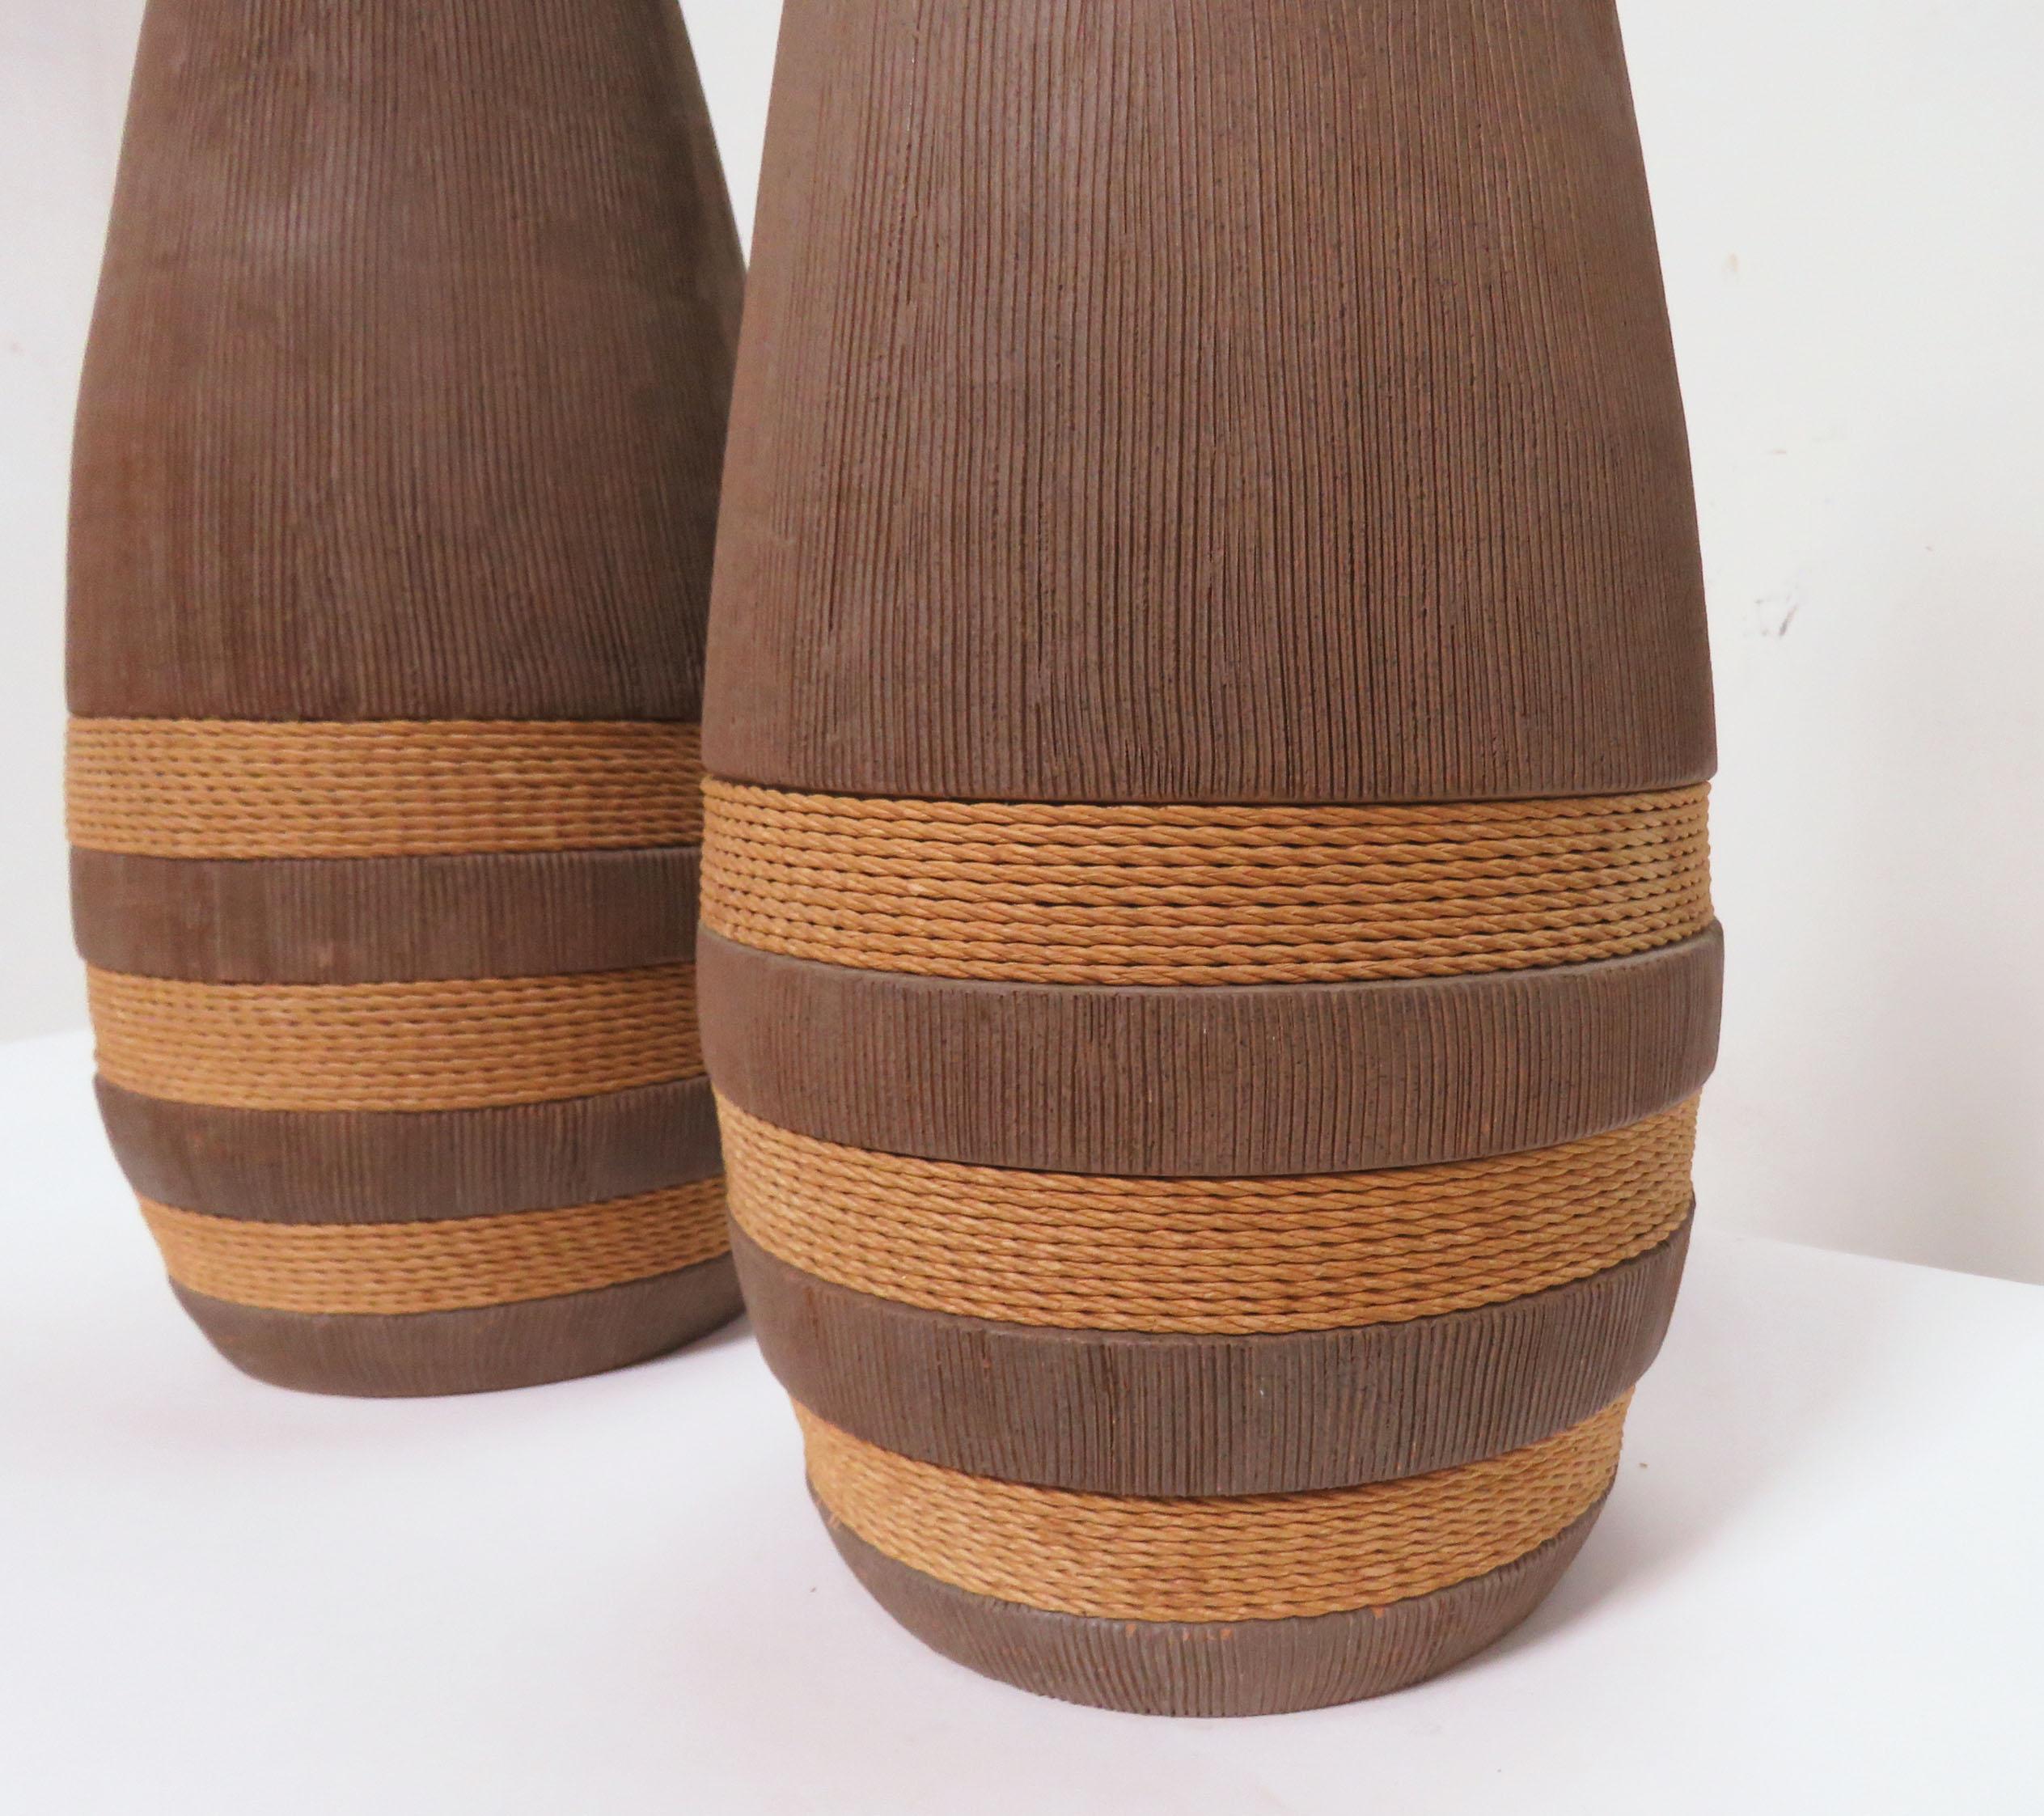 Aldo Londi for Bitossi, Italy Pair of Table Lamps, circa 1960s In Good Condition For Sale In Peabody, MA